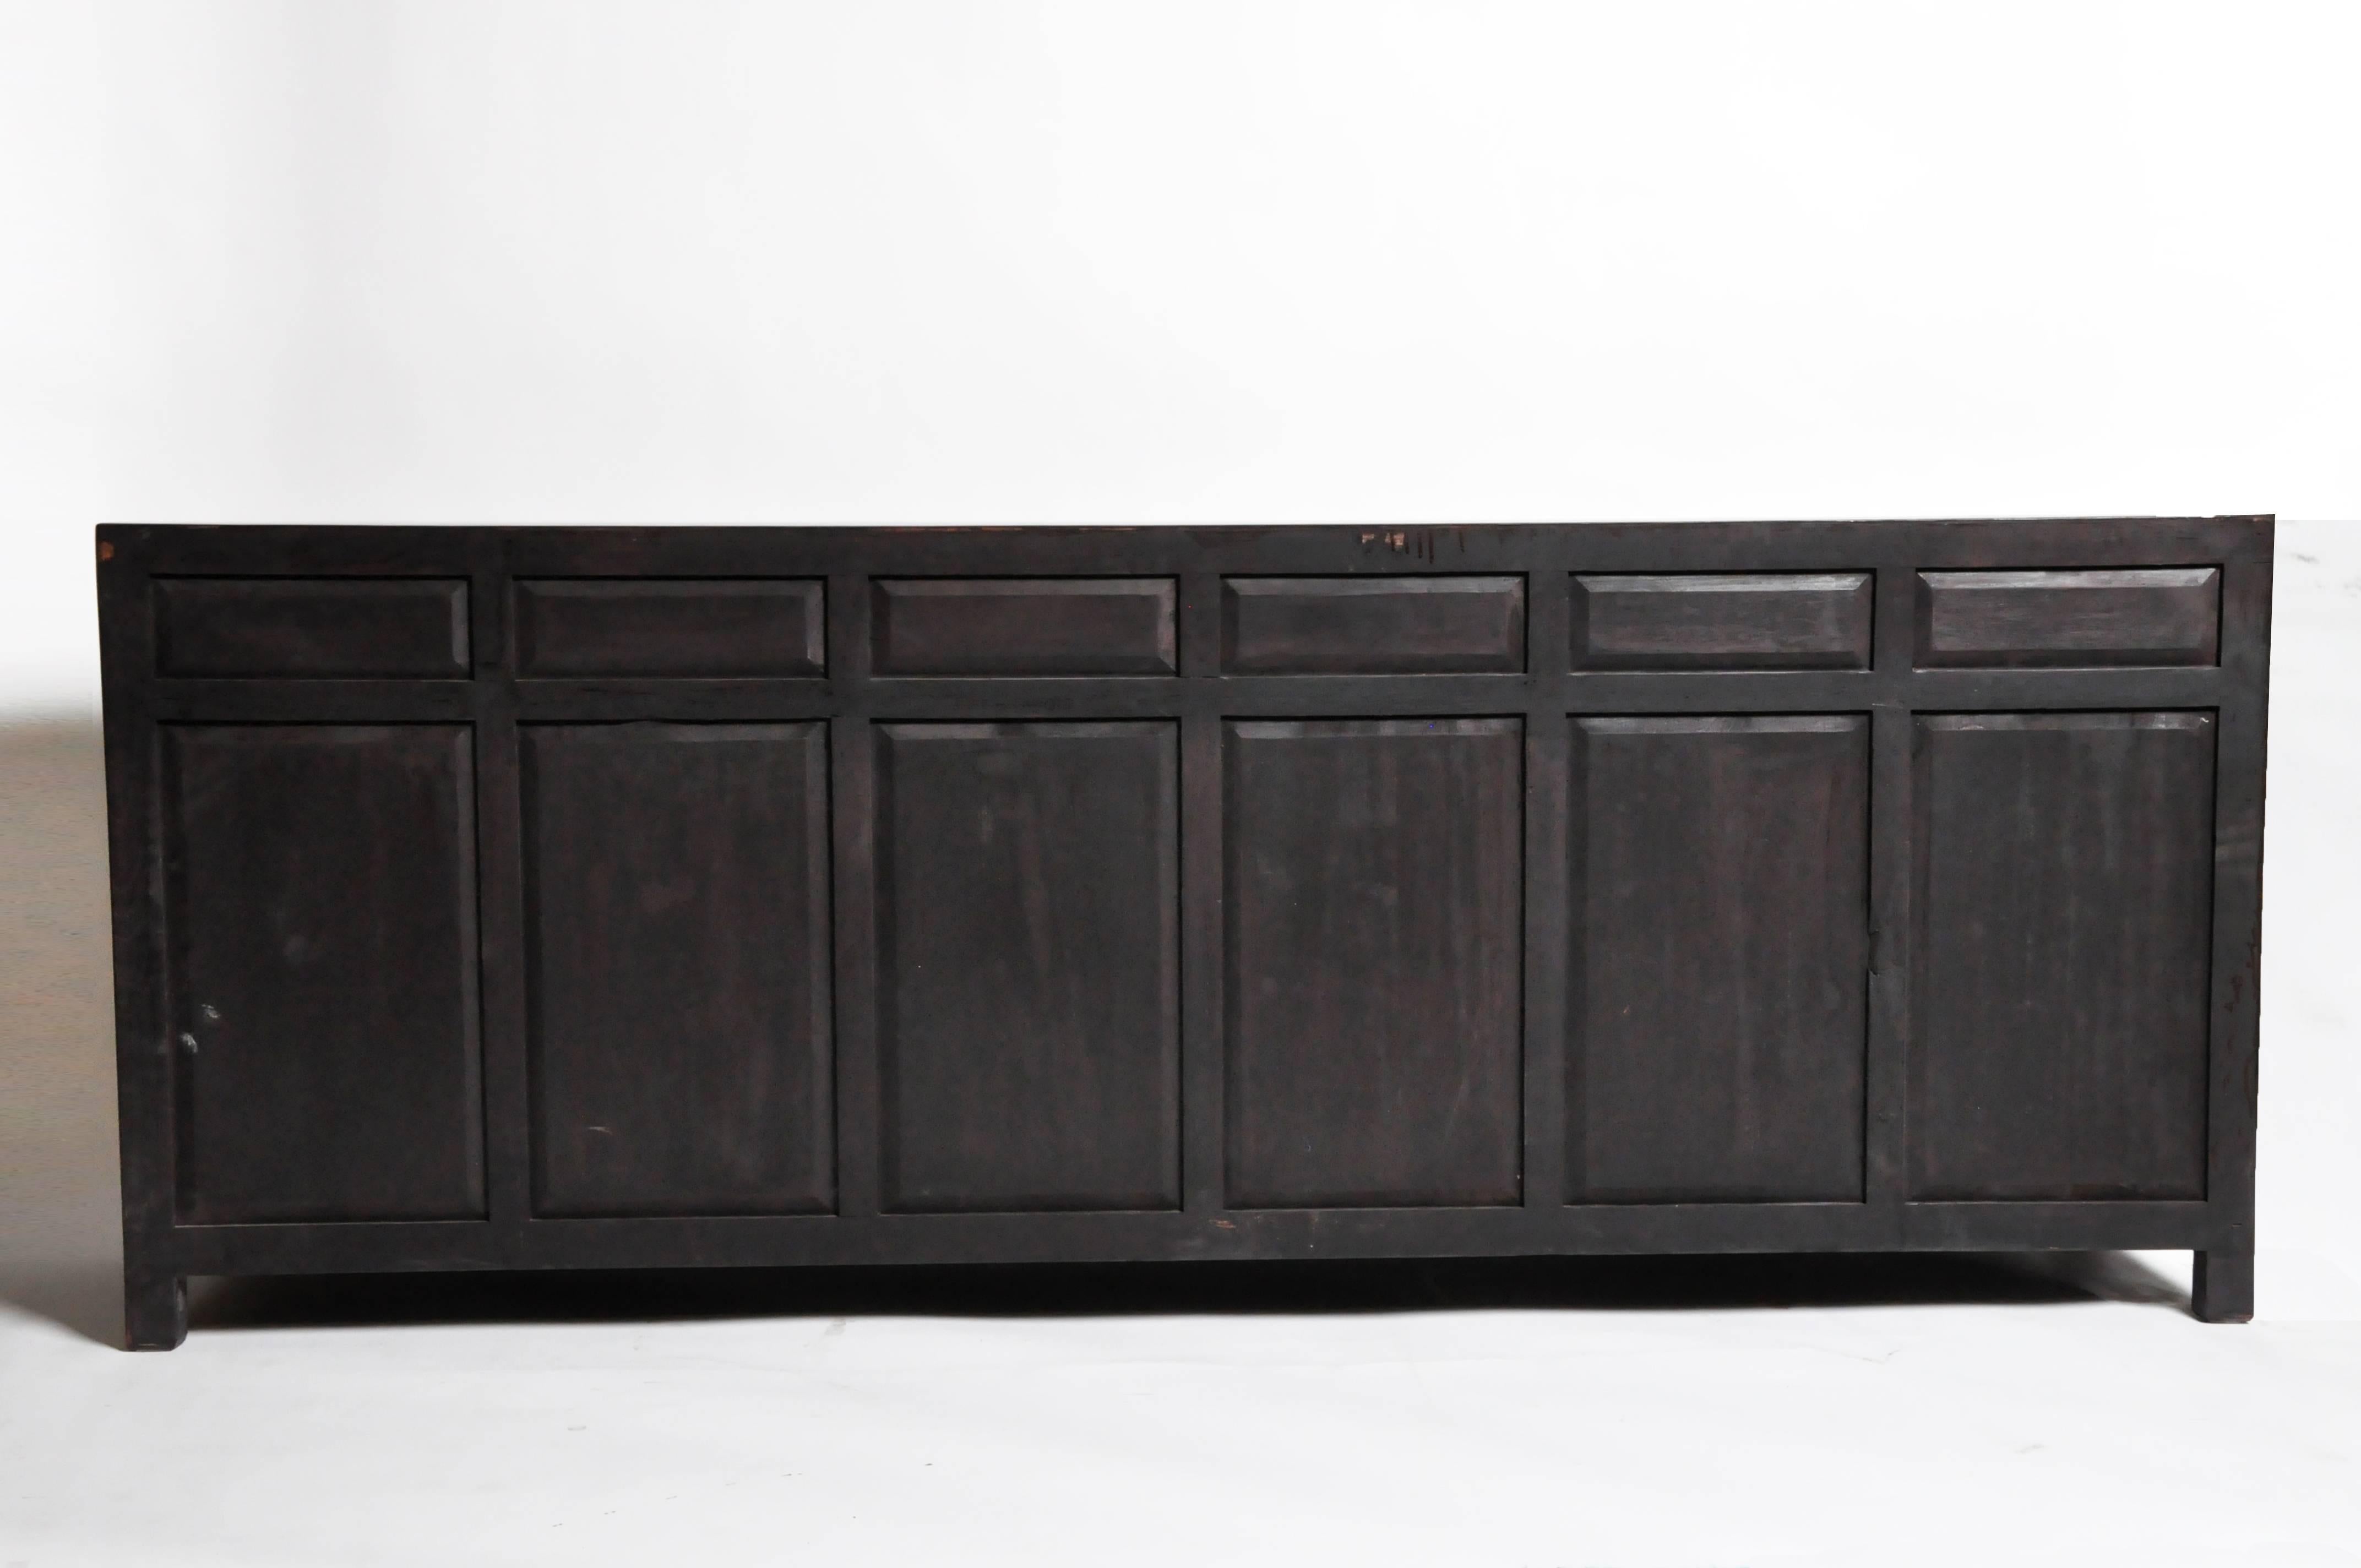 This sideboard is from Hebei, China and was made from reclaimed elm wood. The piece features mortise and tenon joinery, six drawers and three shelves below for ample storage. You can also customize it and make your own. Wood, color, finish, and